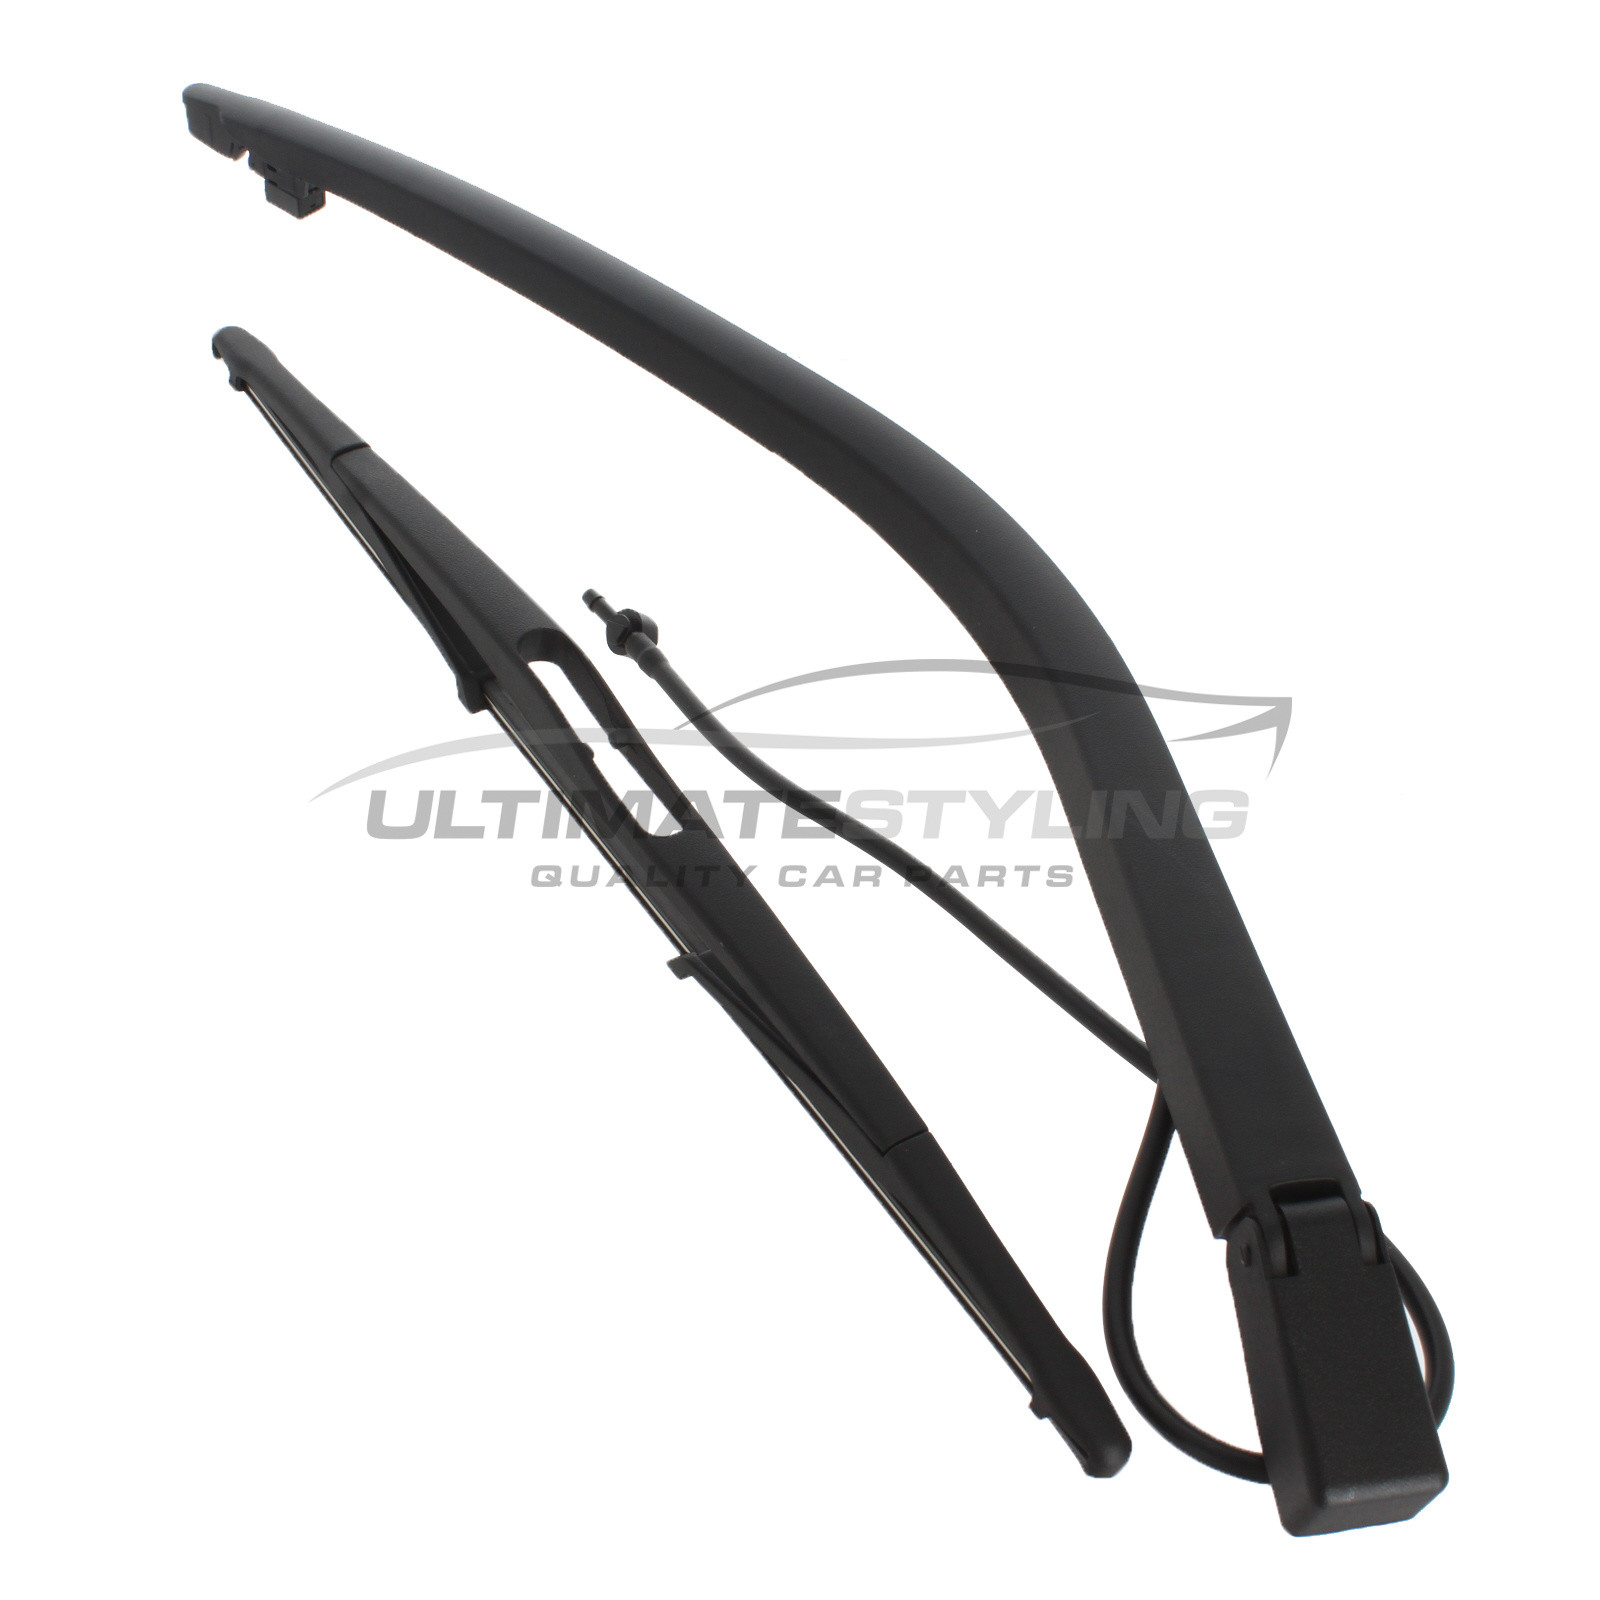 Rear Wiper Arm & Blade Set for Land Rover Discovery